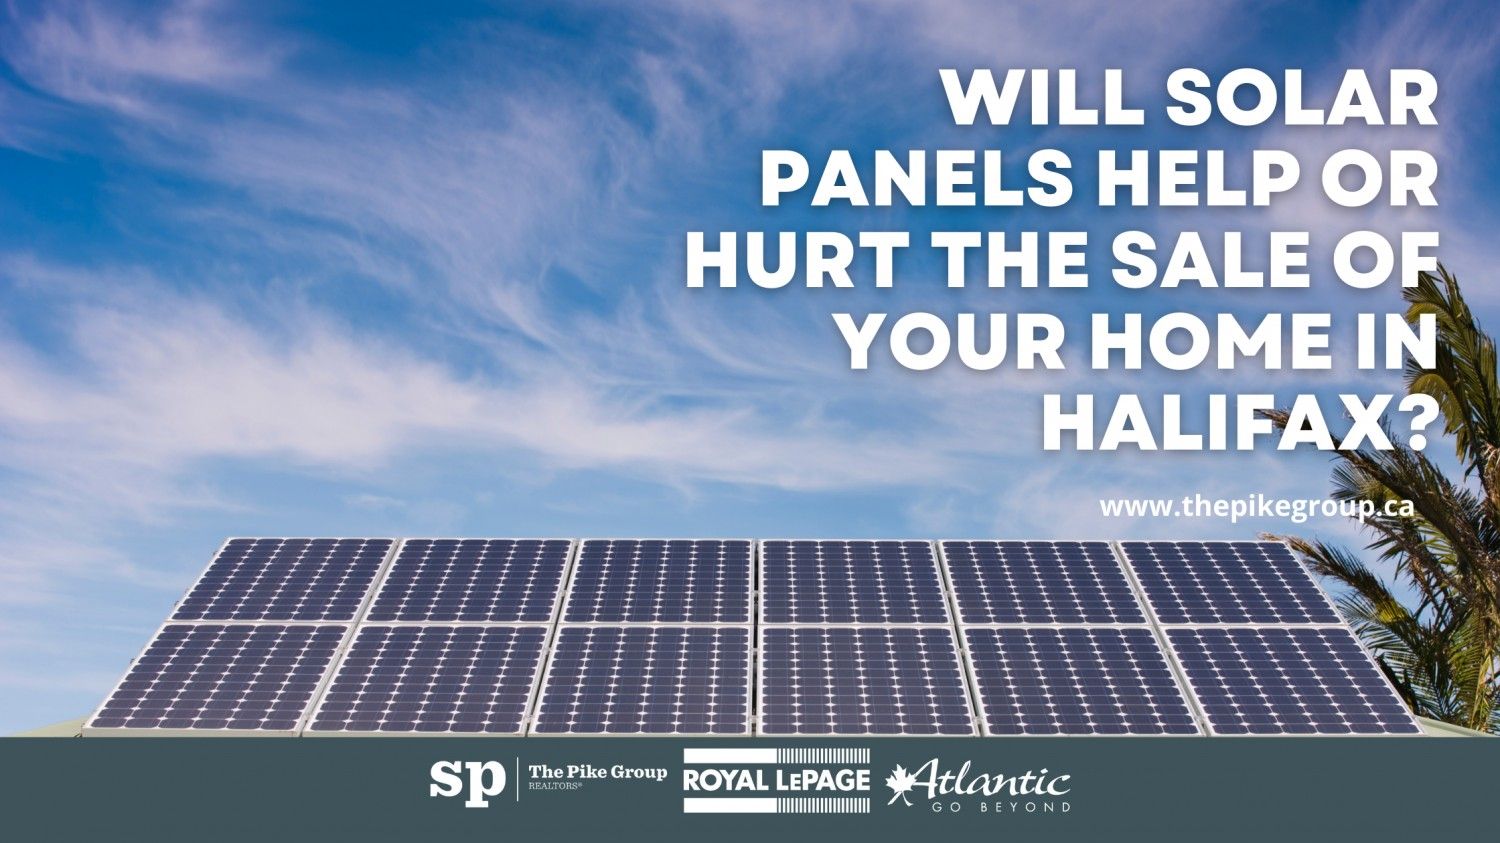 Will Solar Panels help or hurt the sale of your home in Halifax?  Wednesday, Jun 22, 2022